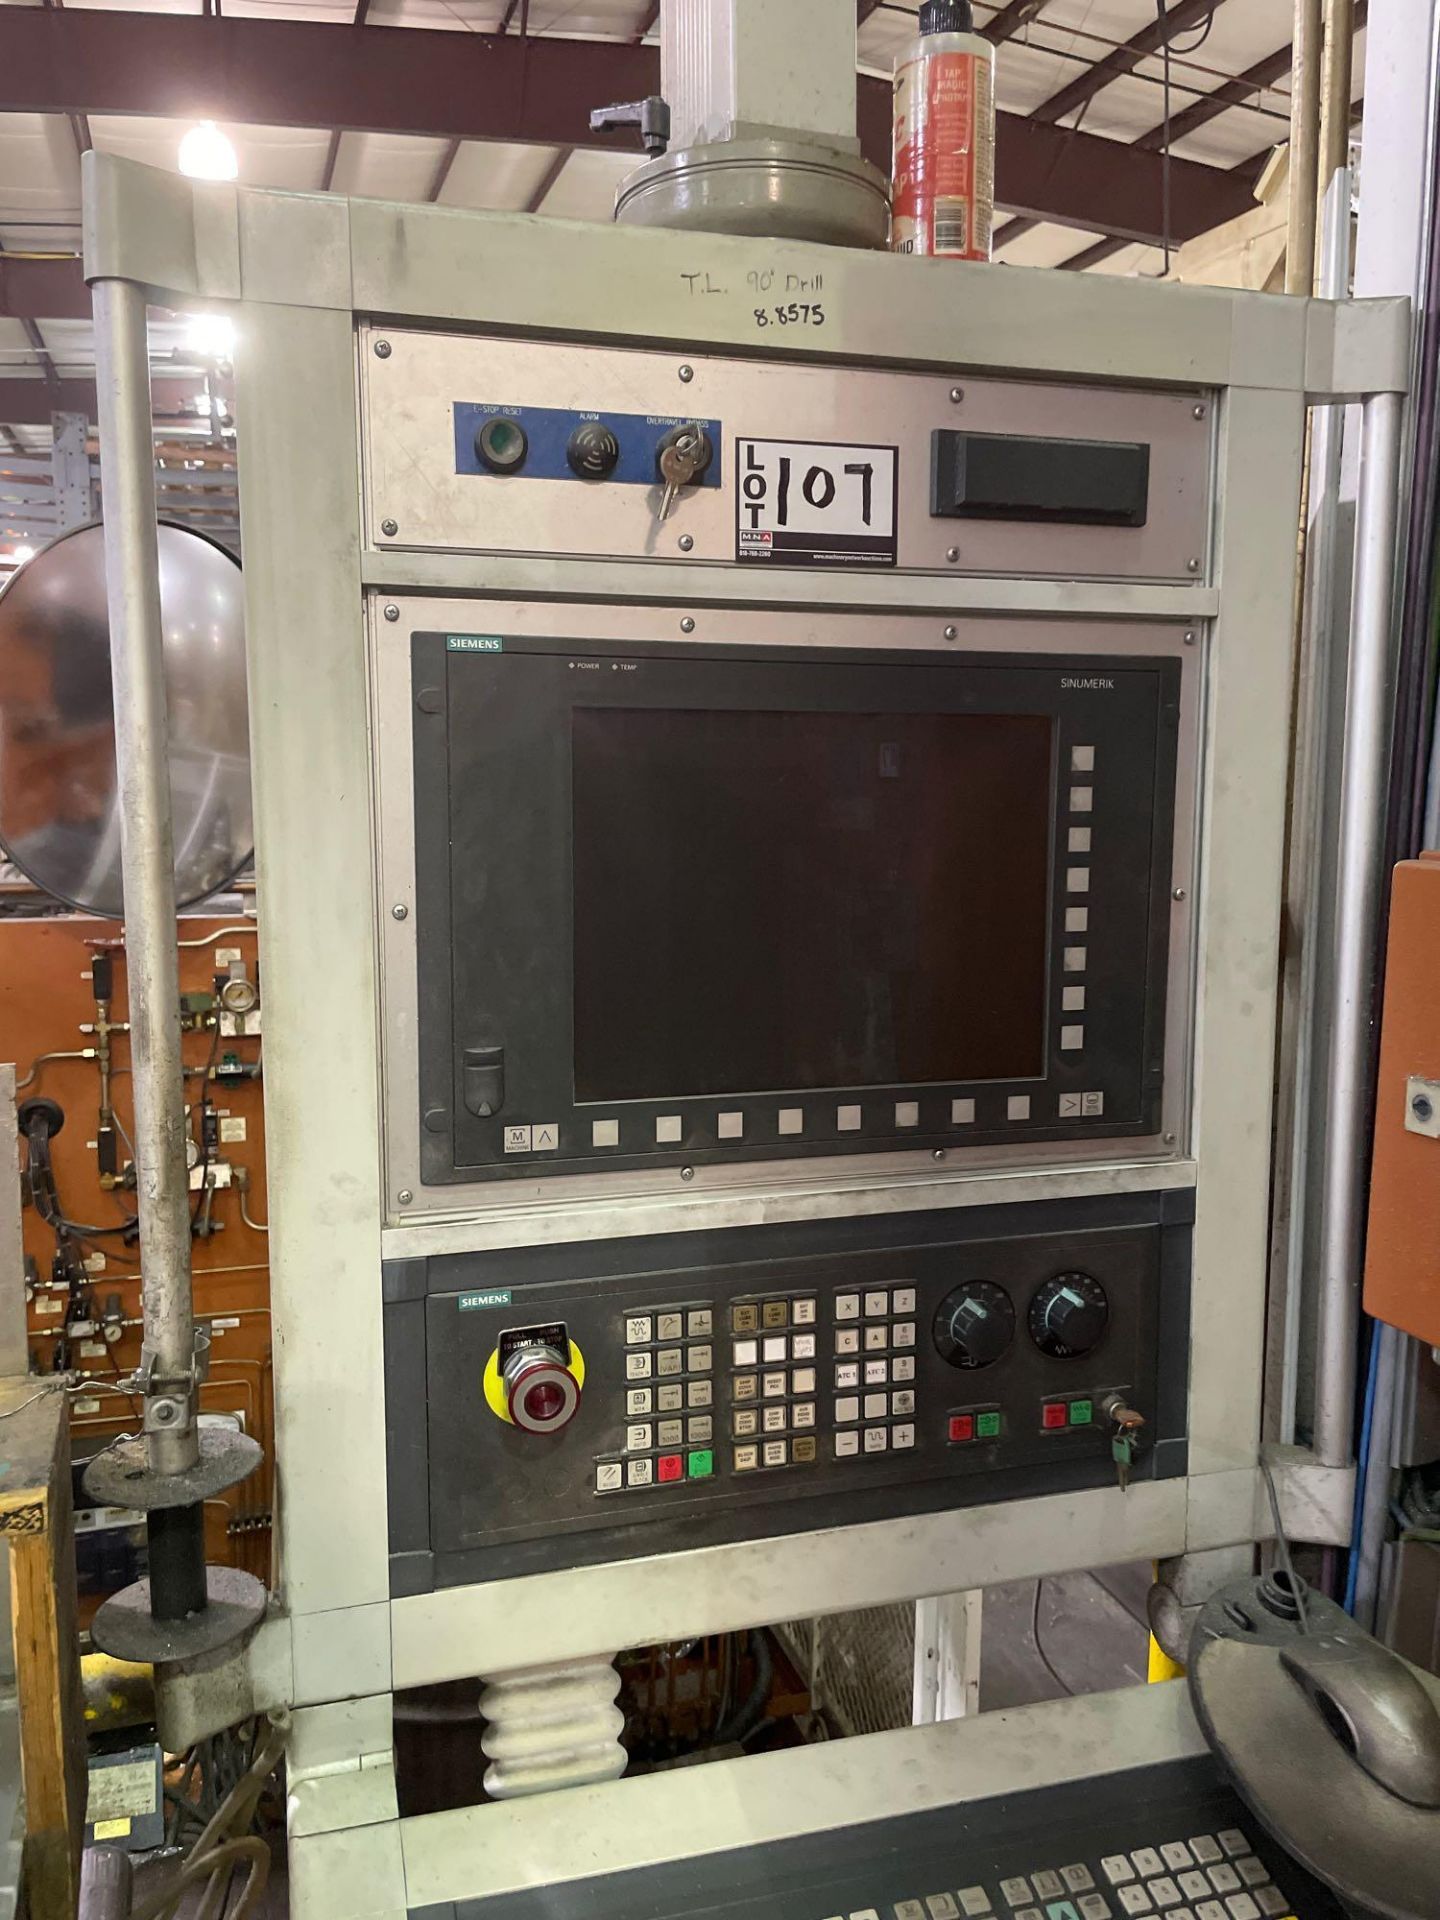 (2) Ingersoll H-18 HSM Powermill 5-Axis Horizontal Machining Center, Seimens CNC Control, New 2004 - Image 23 of 23